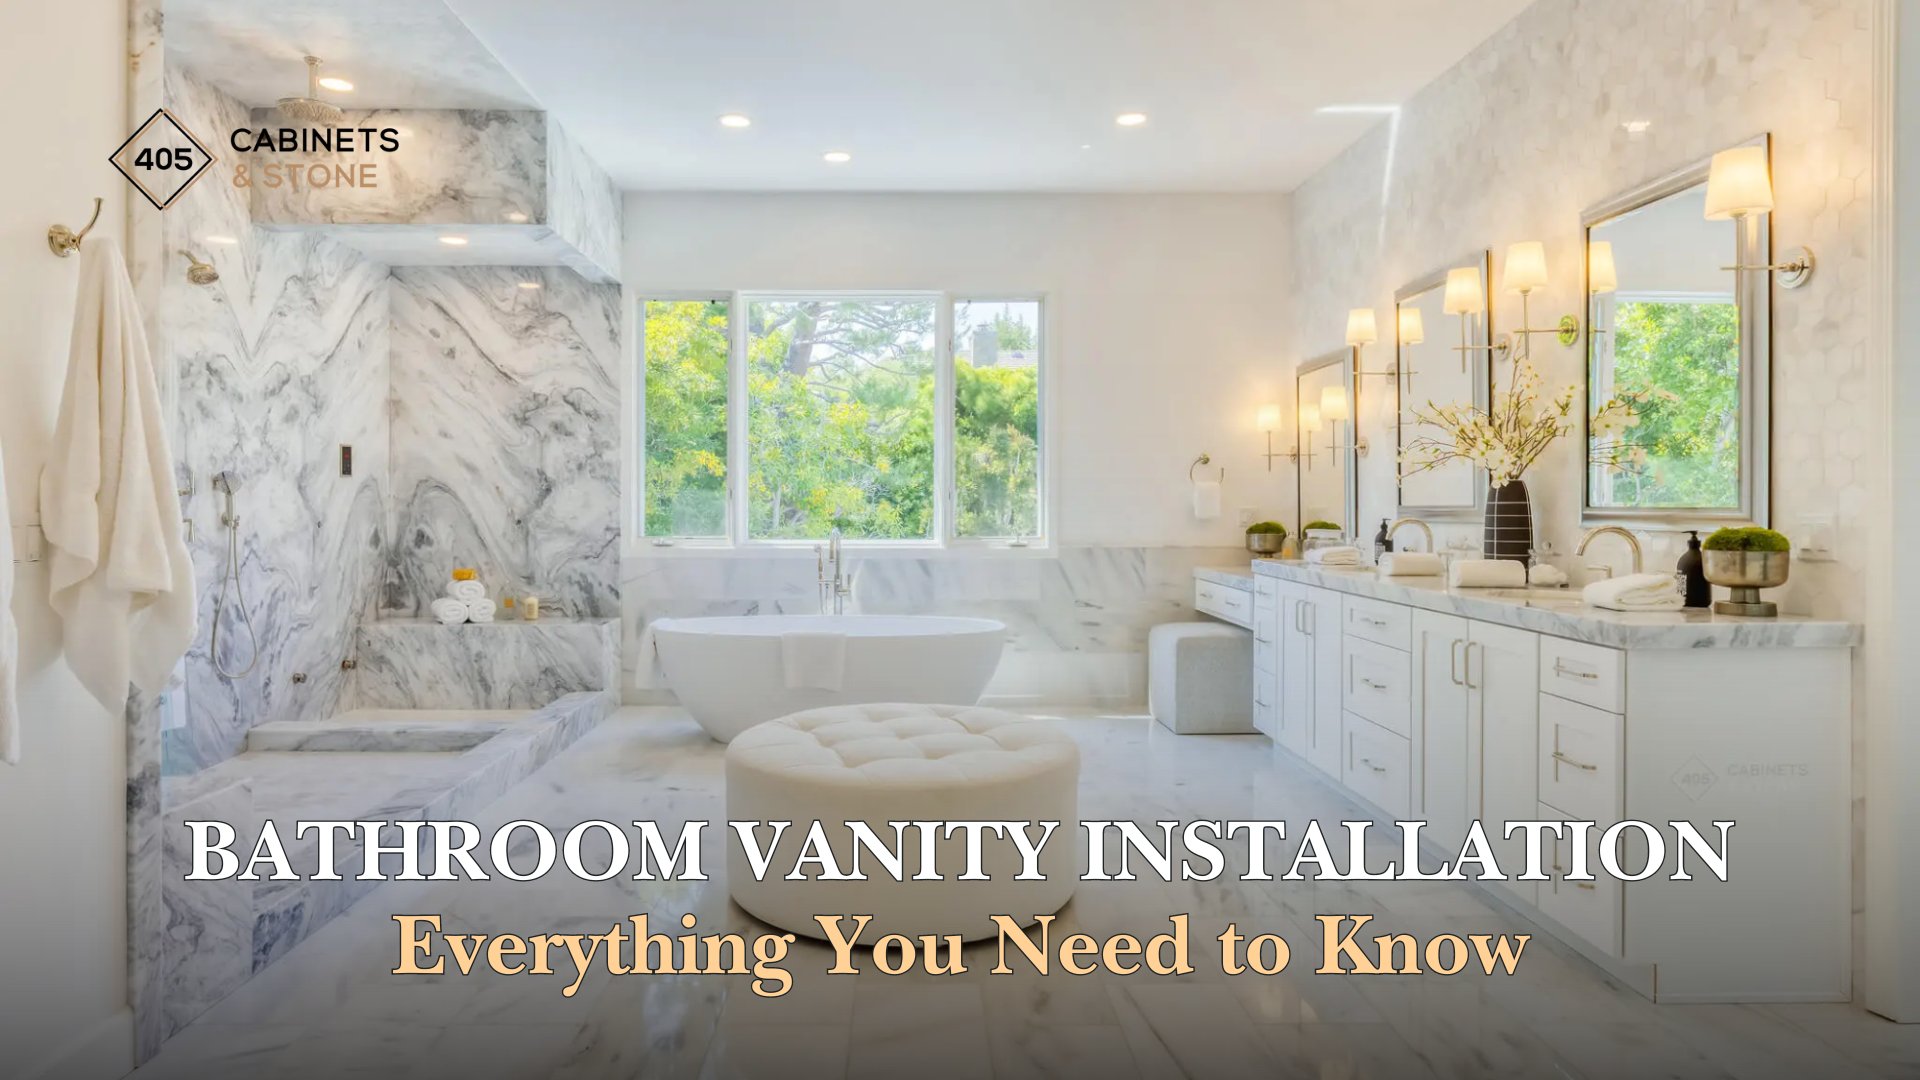 Bathroom Vanity Installation Everything You Need to Know